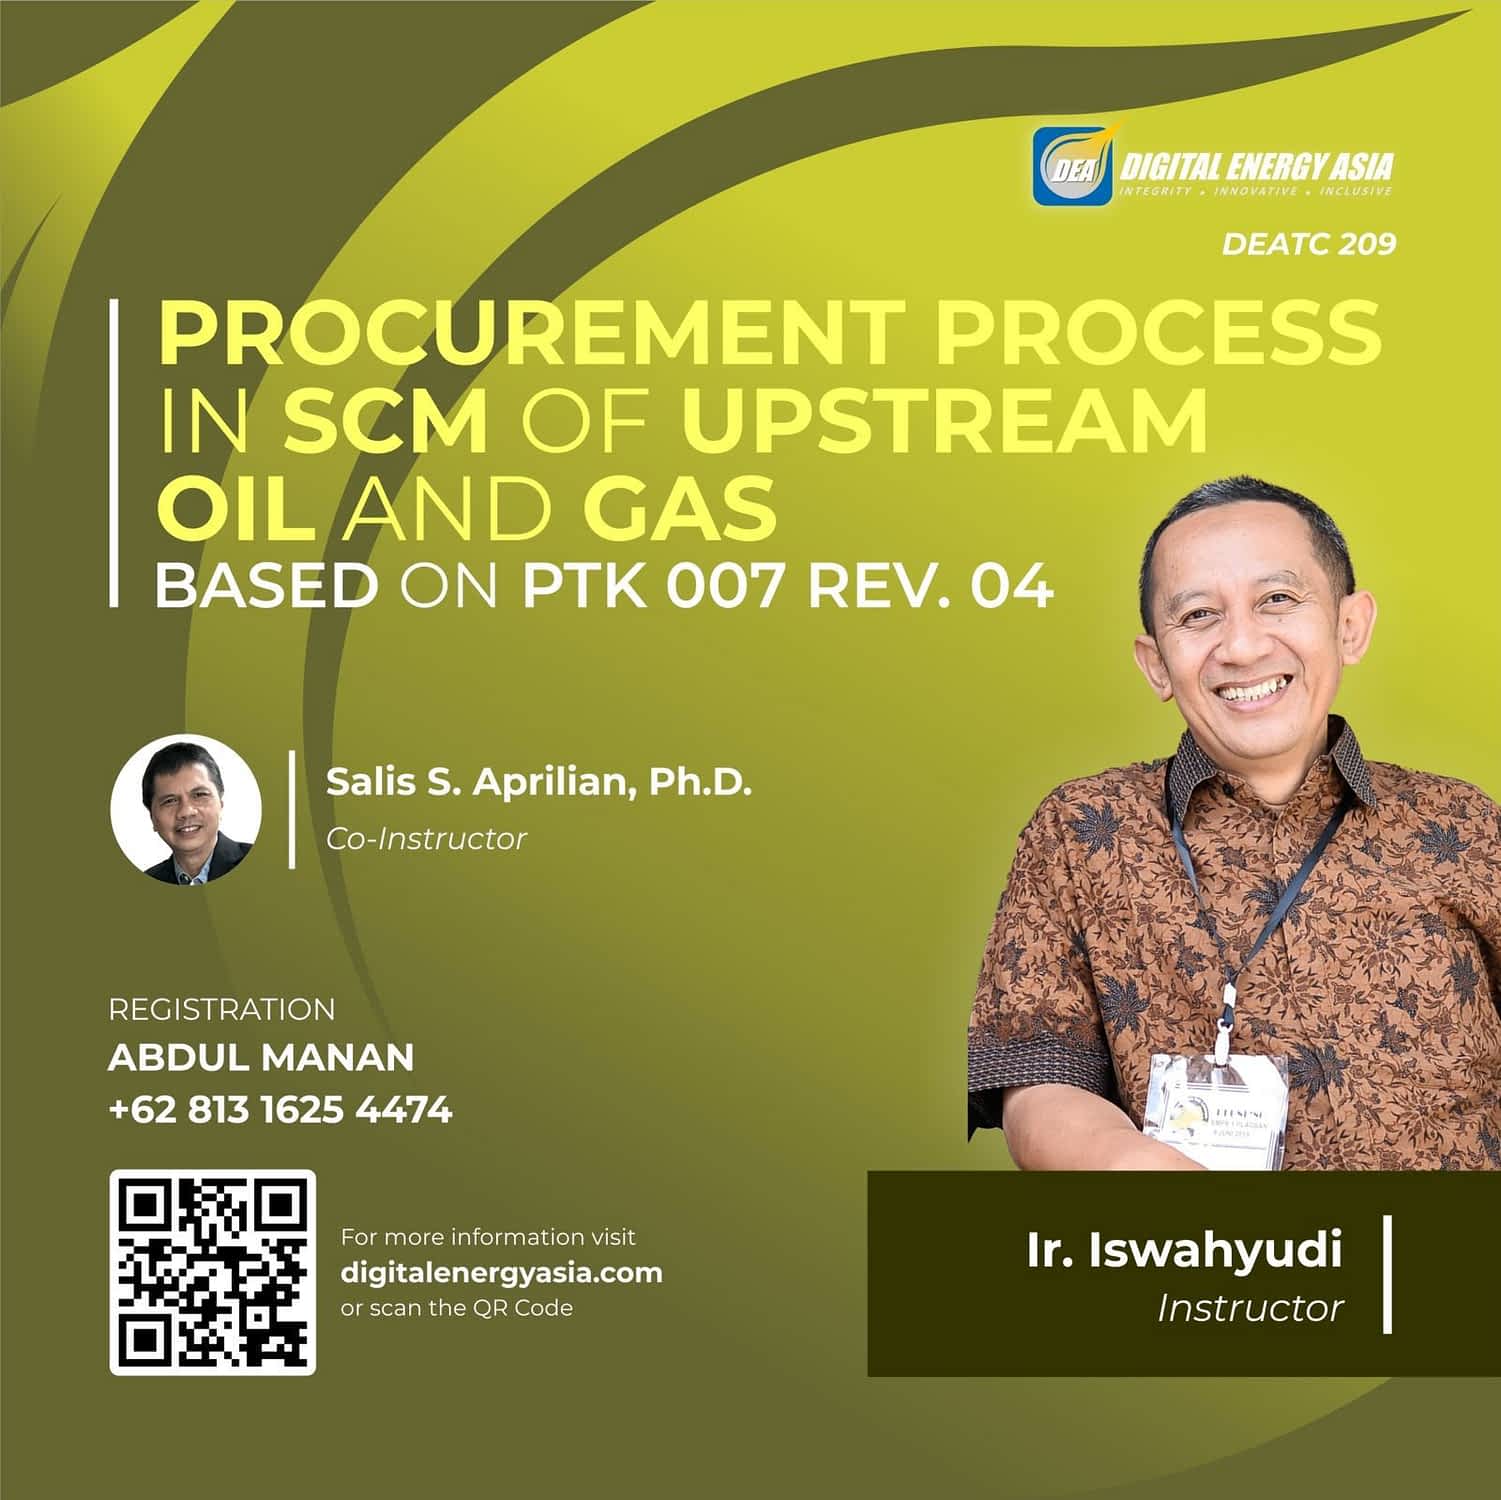 DEATC 209 - Procurement Process in SCM Of Upstream Oil and Gas based on PTK 007 Rev 04